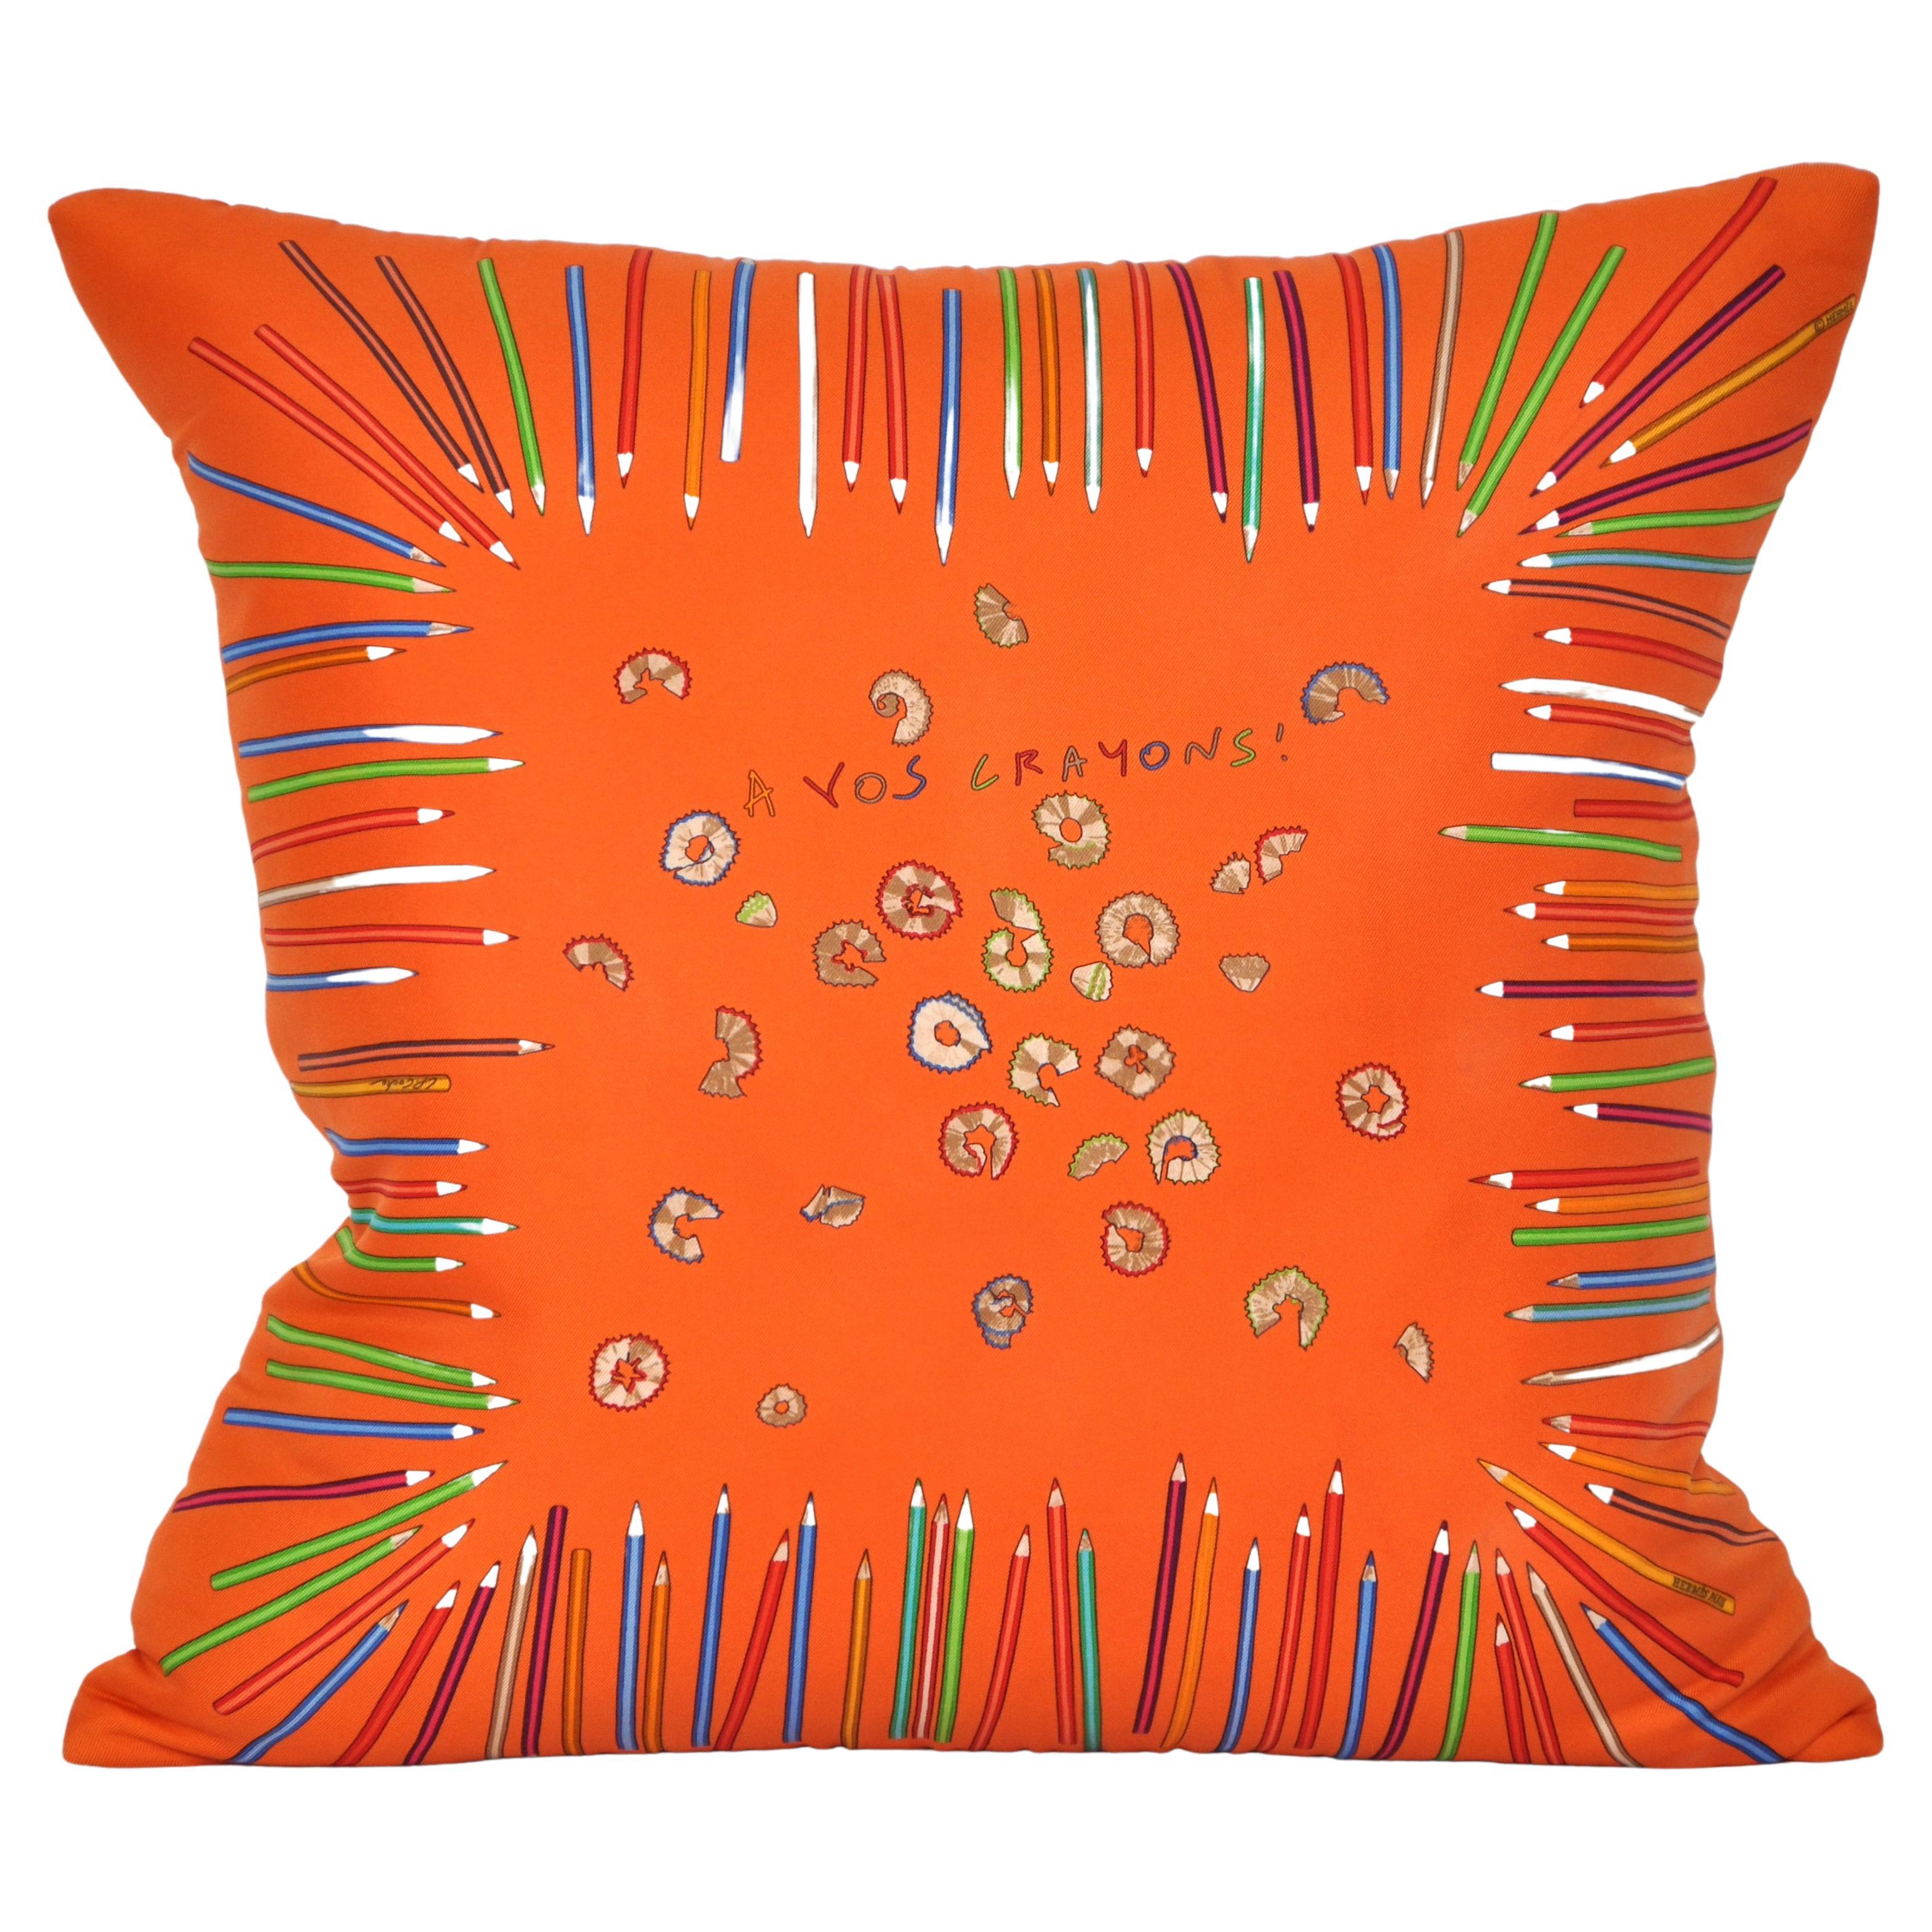 Hermès Pillows and Throws - 36 For Sale at 1stDibs | hermes sofa pillows, hermes  cushions and throws, hermes pillows